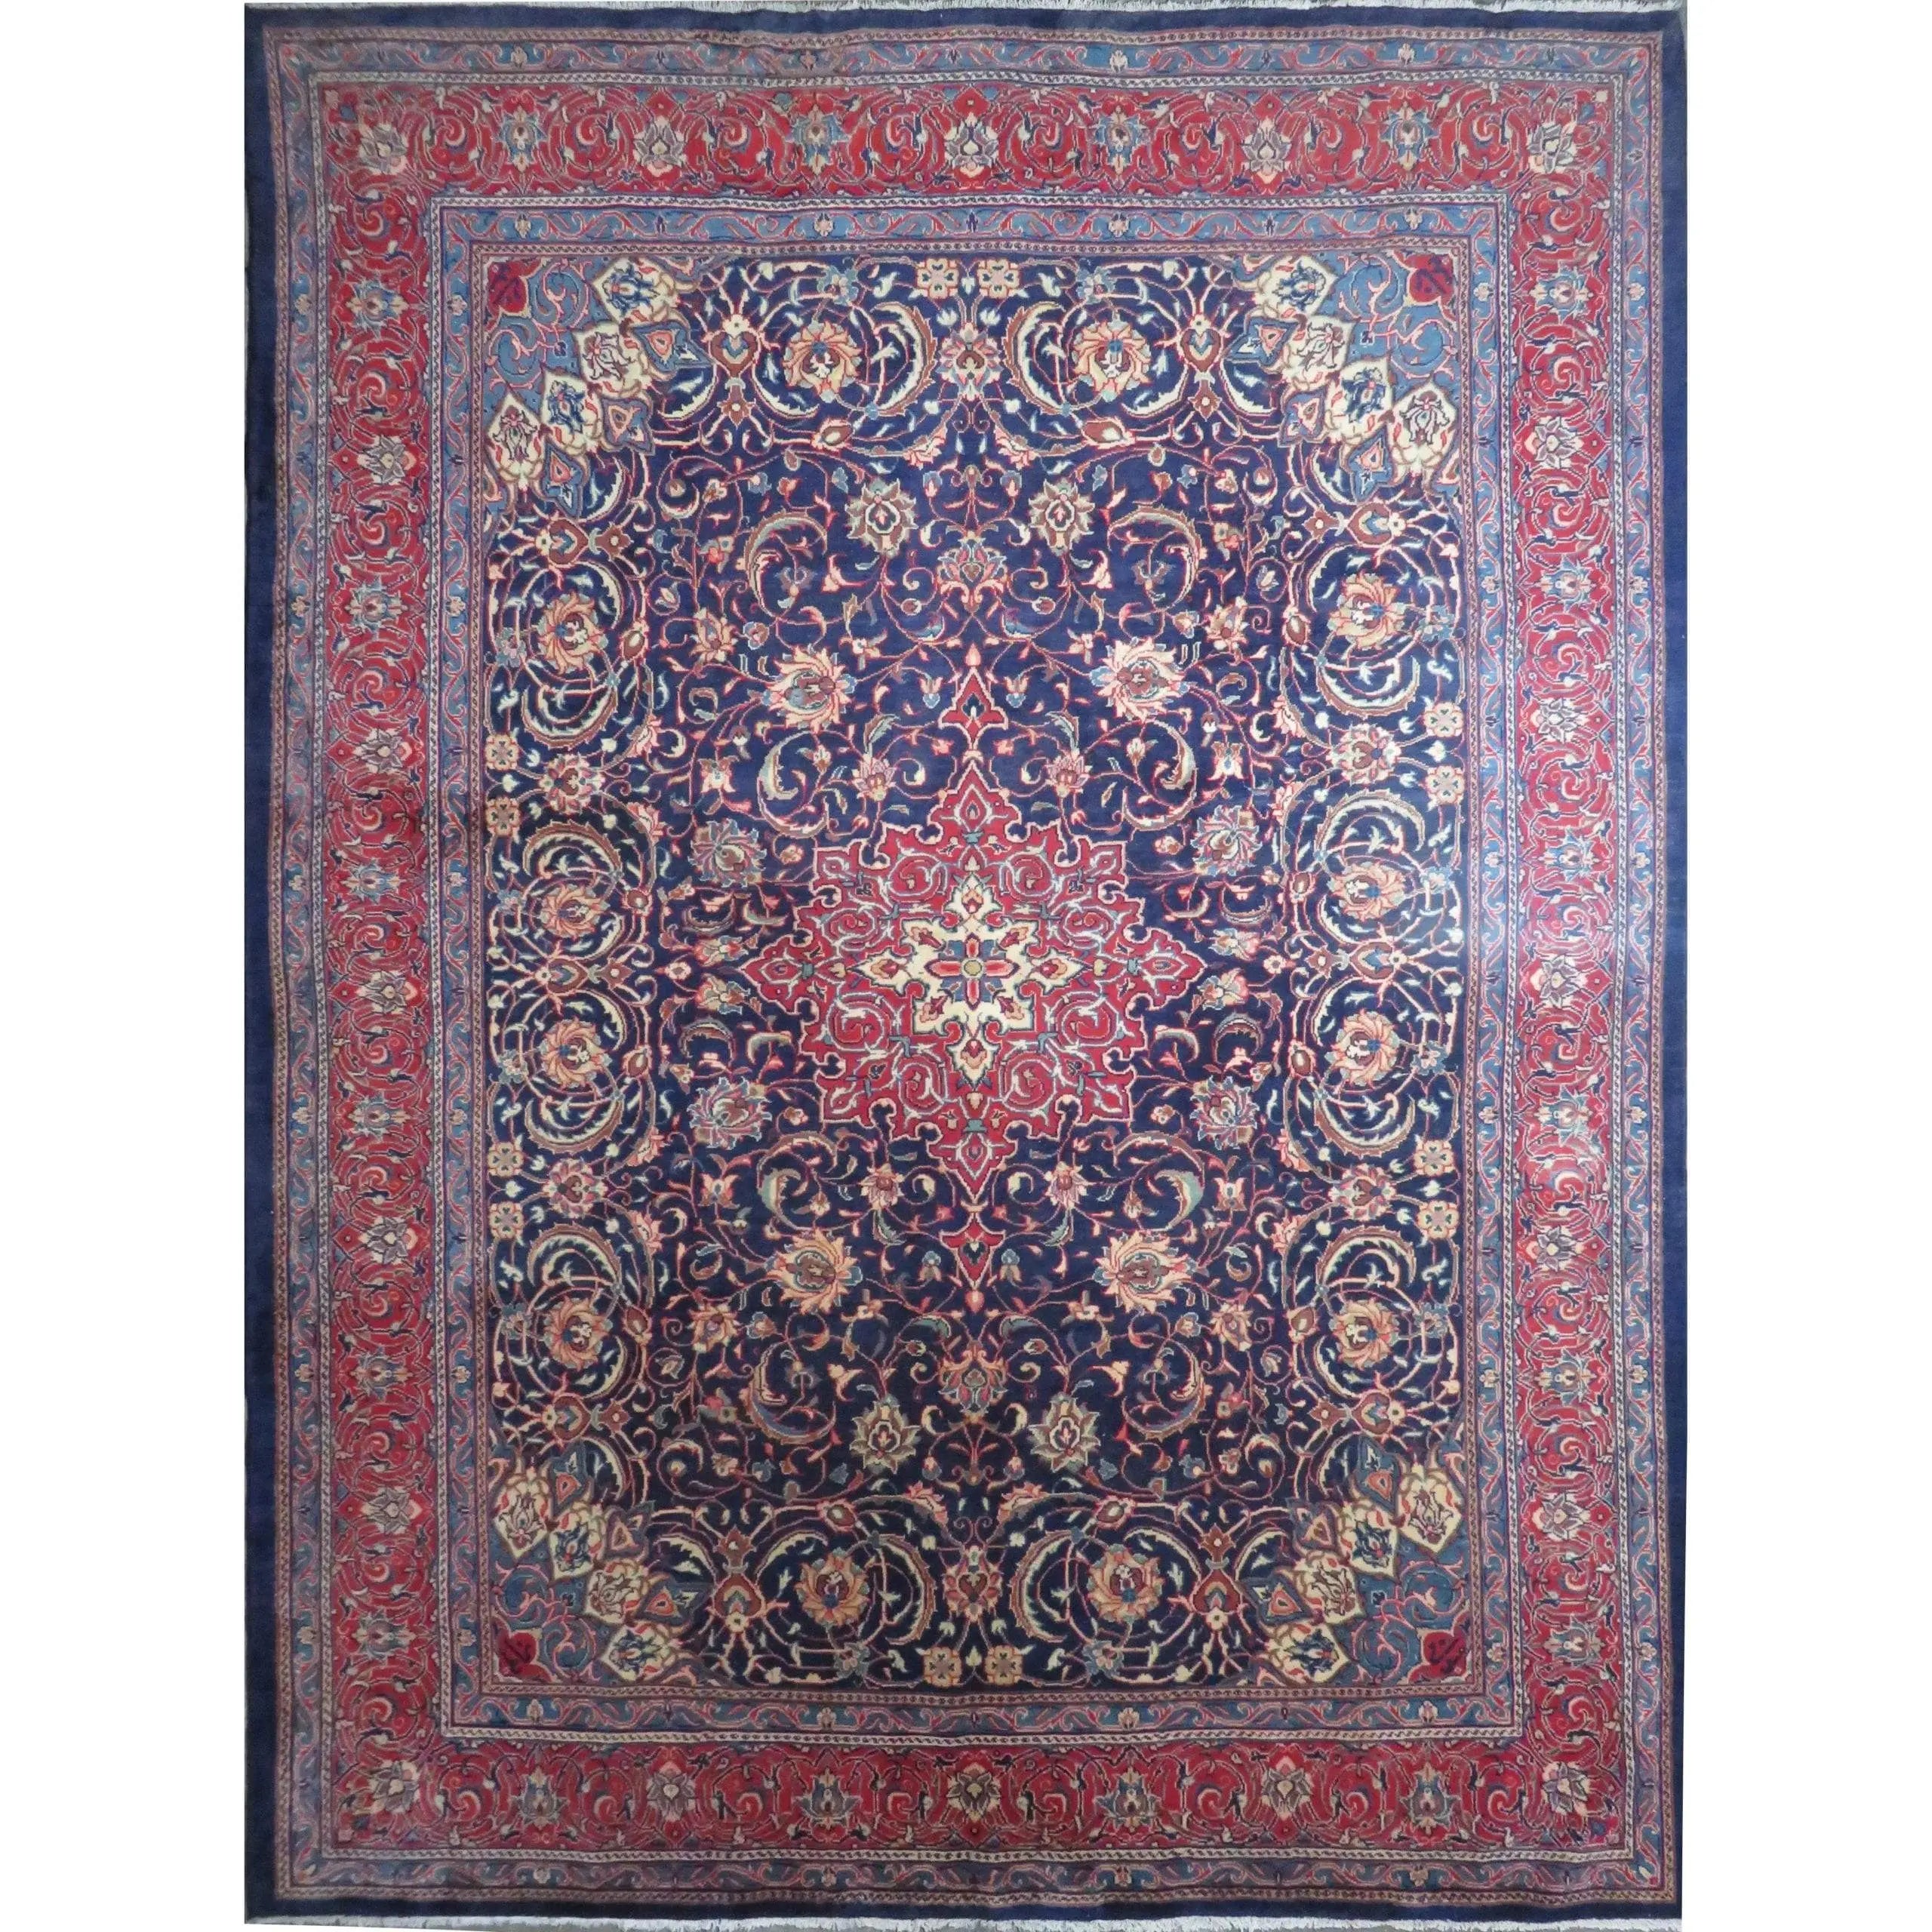 Hand-Knotted Persian Wool Rug _ Luxurious Vintage Design, 13'3" x 9'7", Artisan Crafted